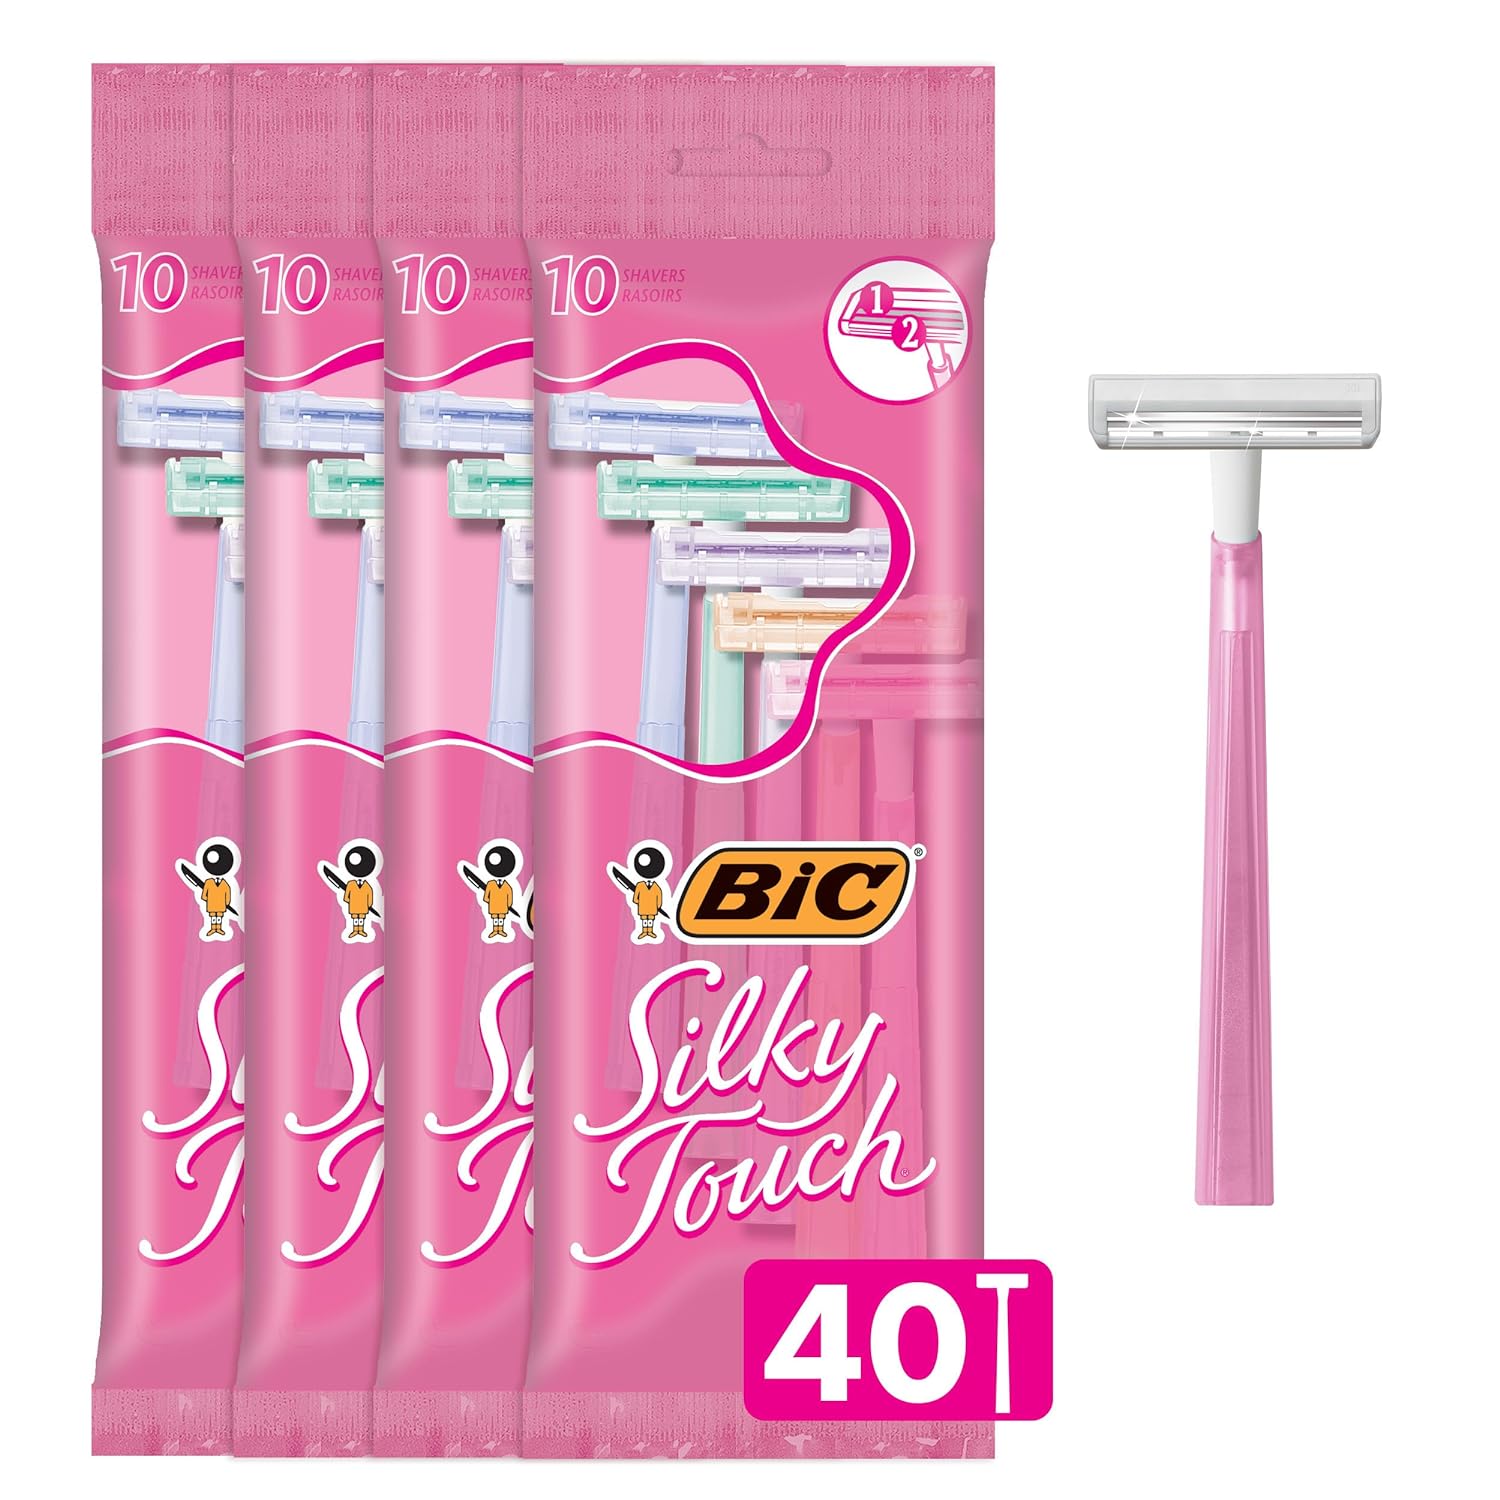 These razors always make shaving a easy and efficient process. Most razors are dull and make shaving a hassle, but BIC hairs dont stand a chance. Great product